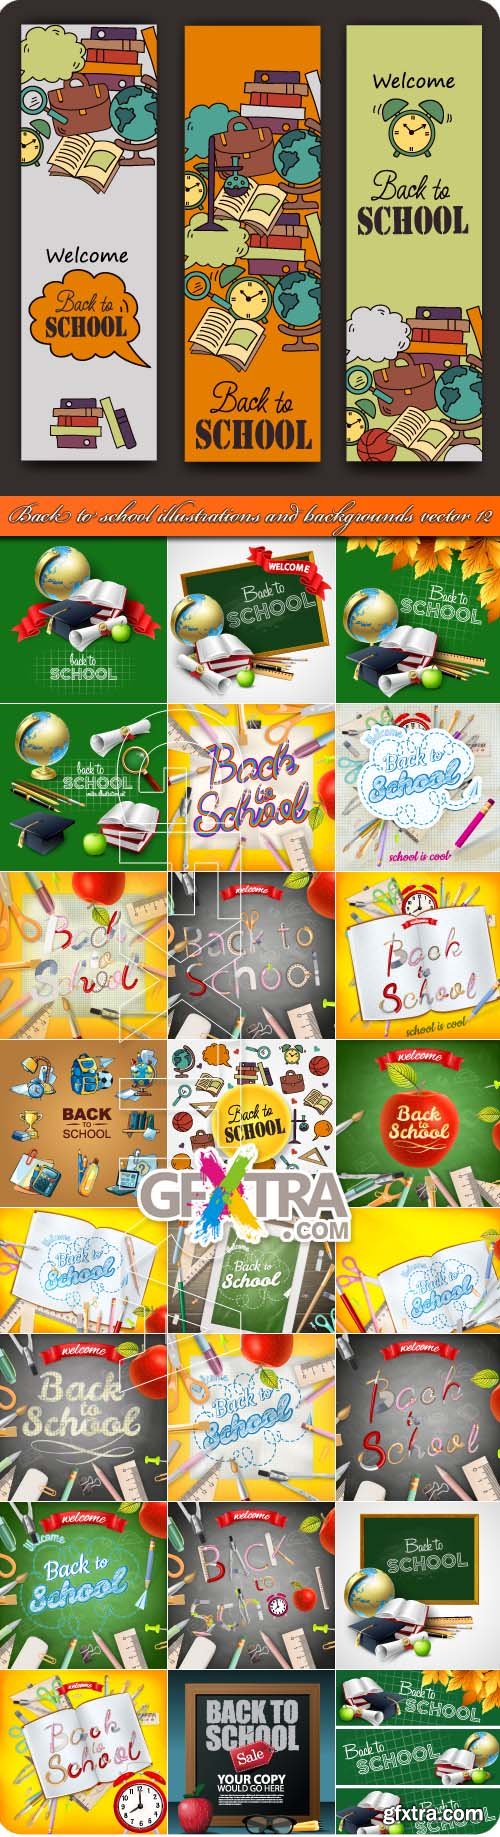 Back to school illustrations and backgrounds vector 12